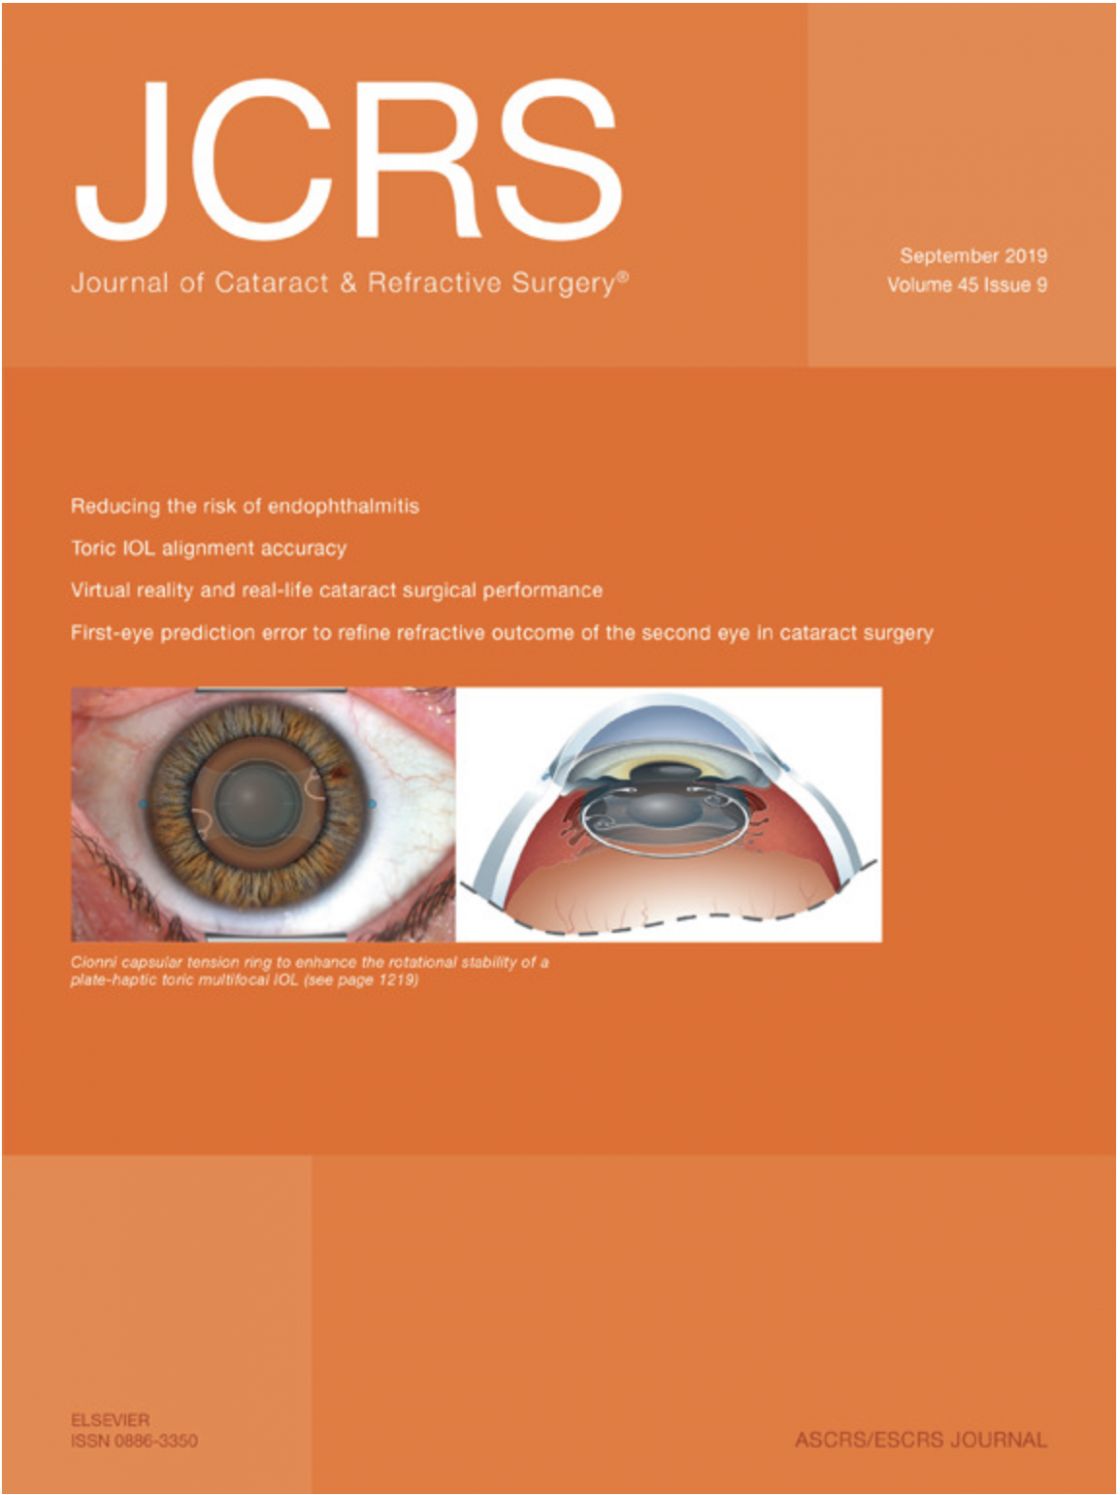 Measurement of central corneal thickness with optical low-coherence reflectometry and ultrasound pachymetry in normal and post-femtosecond laser in situ keratomileusis eyes